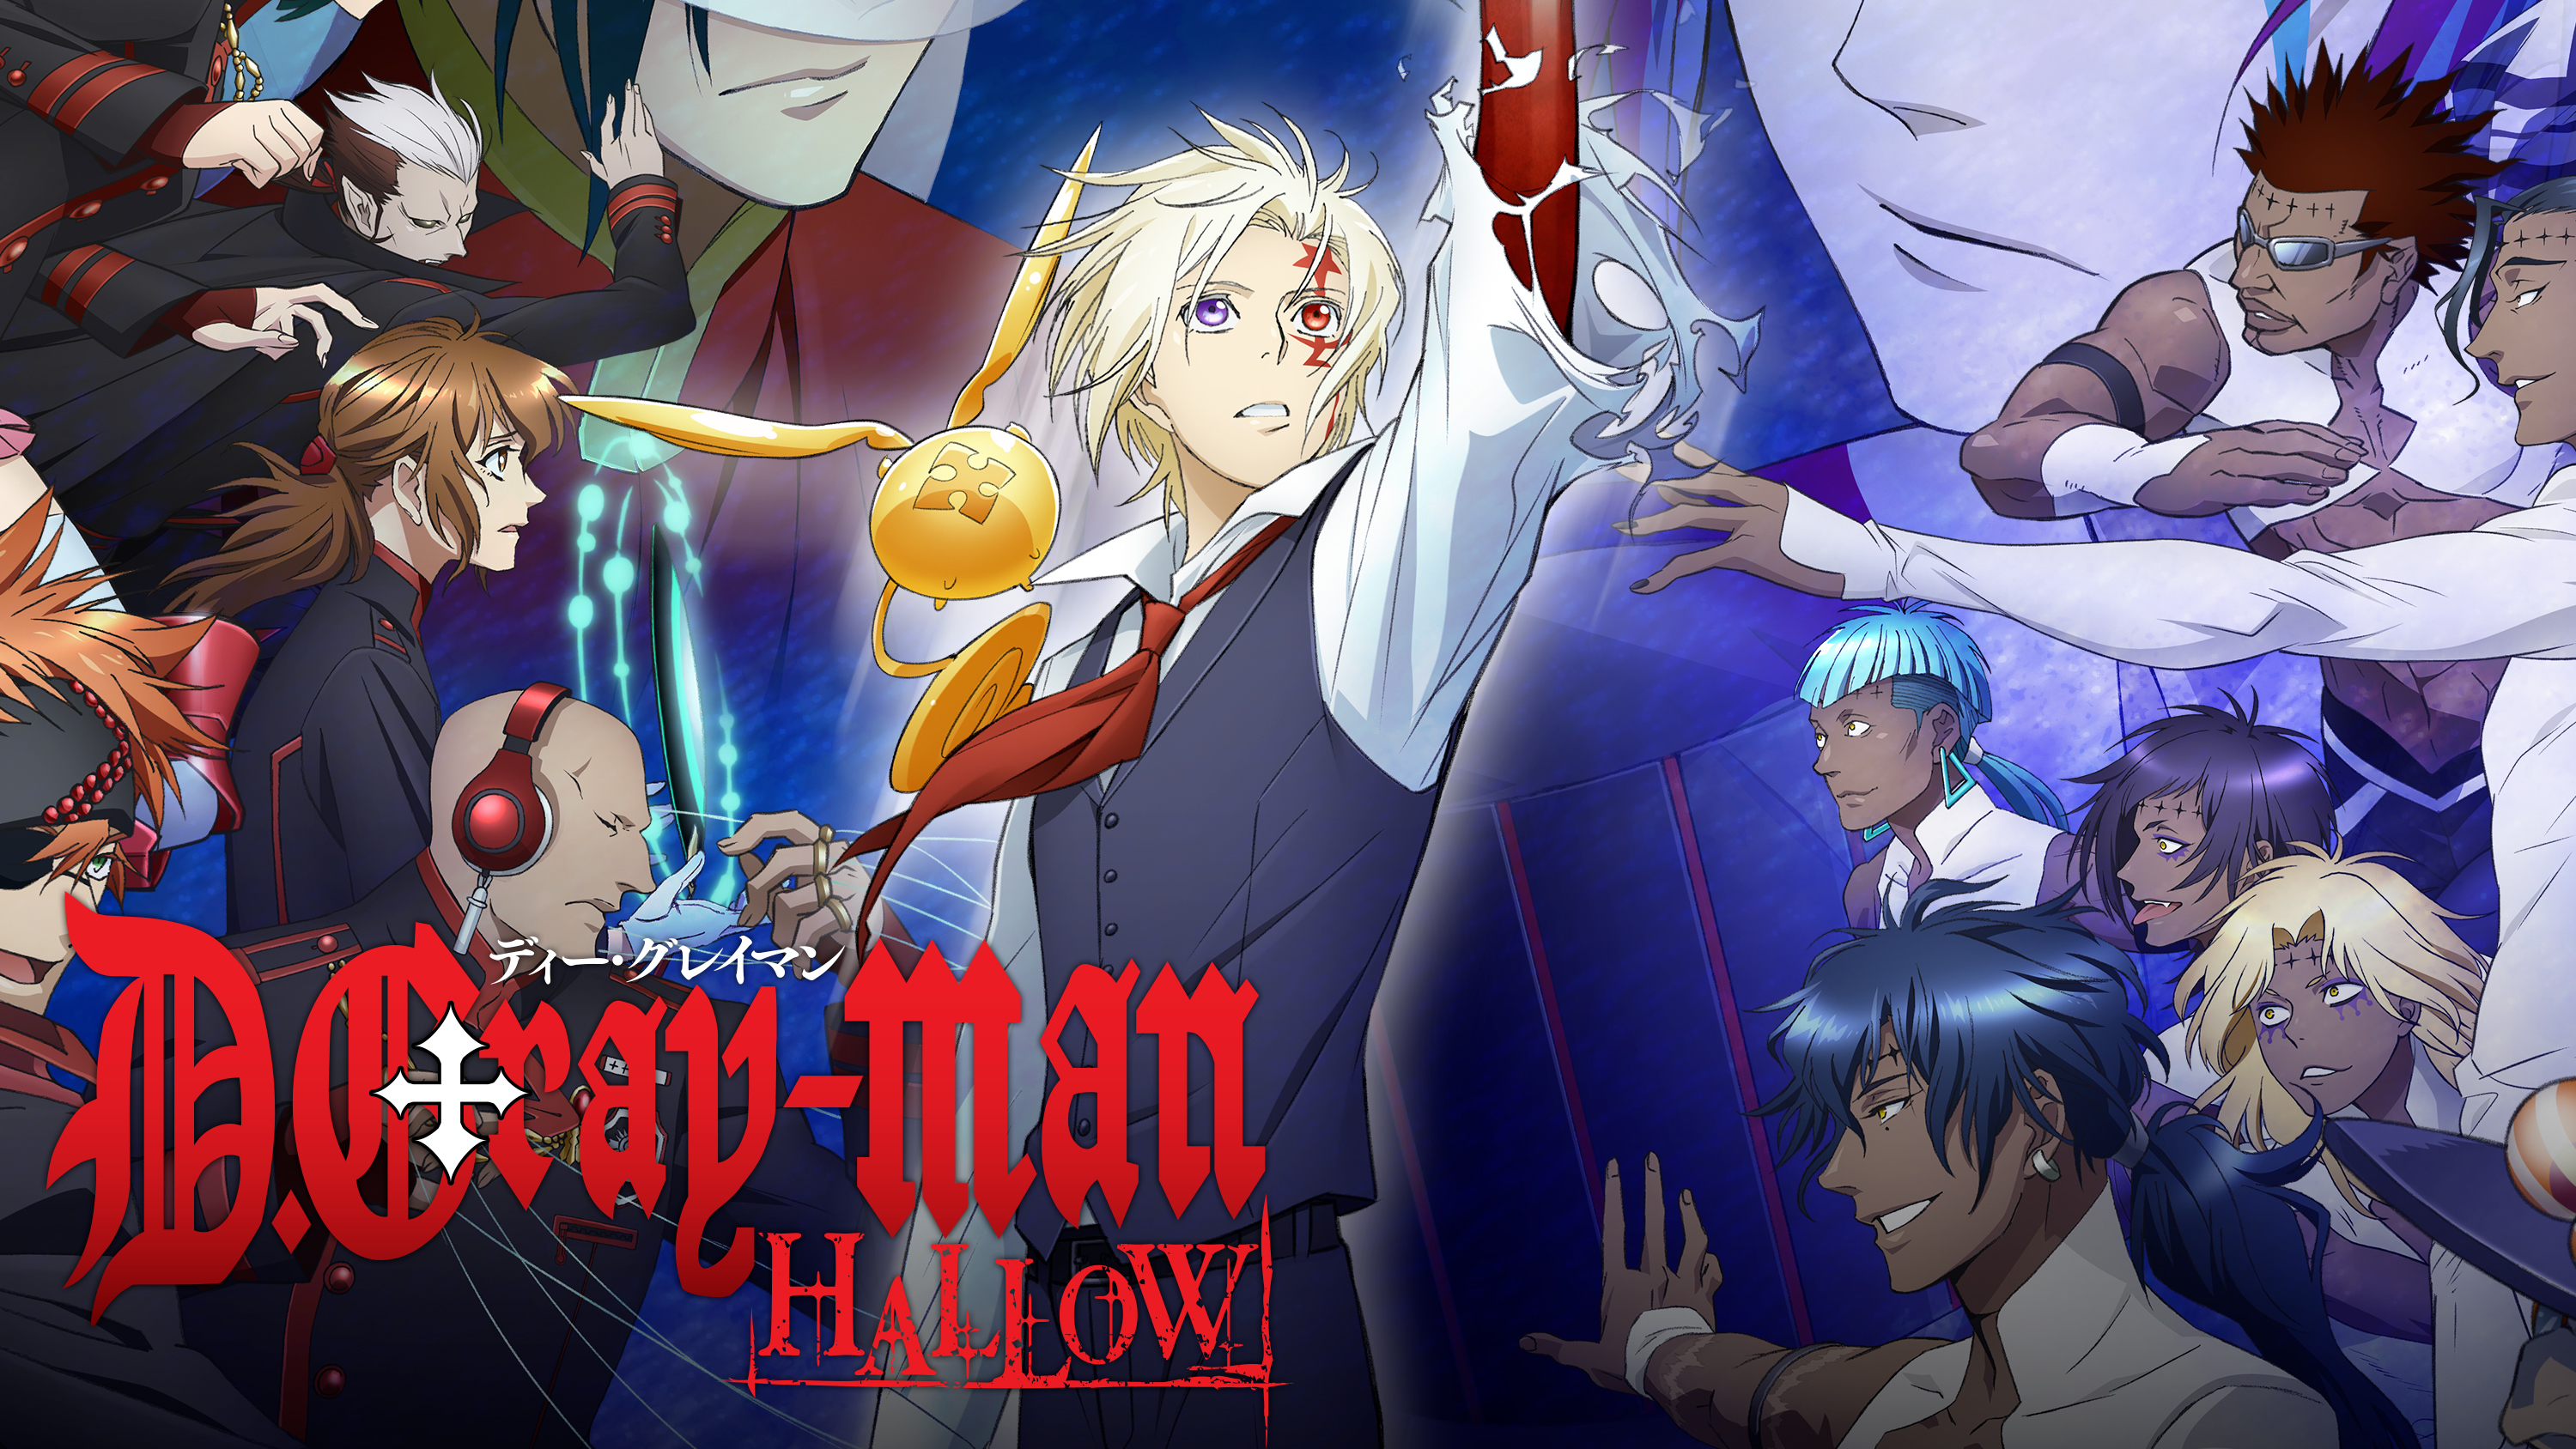 Gray-man Episodes Sub & Dub - D Gray Man Hallow Characters , HD Wallpaper & Backgrounds